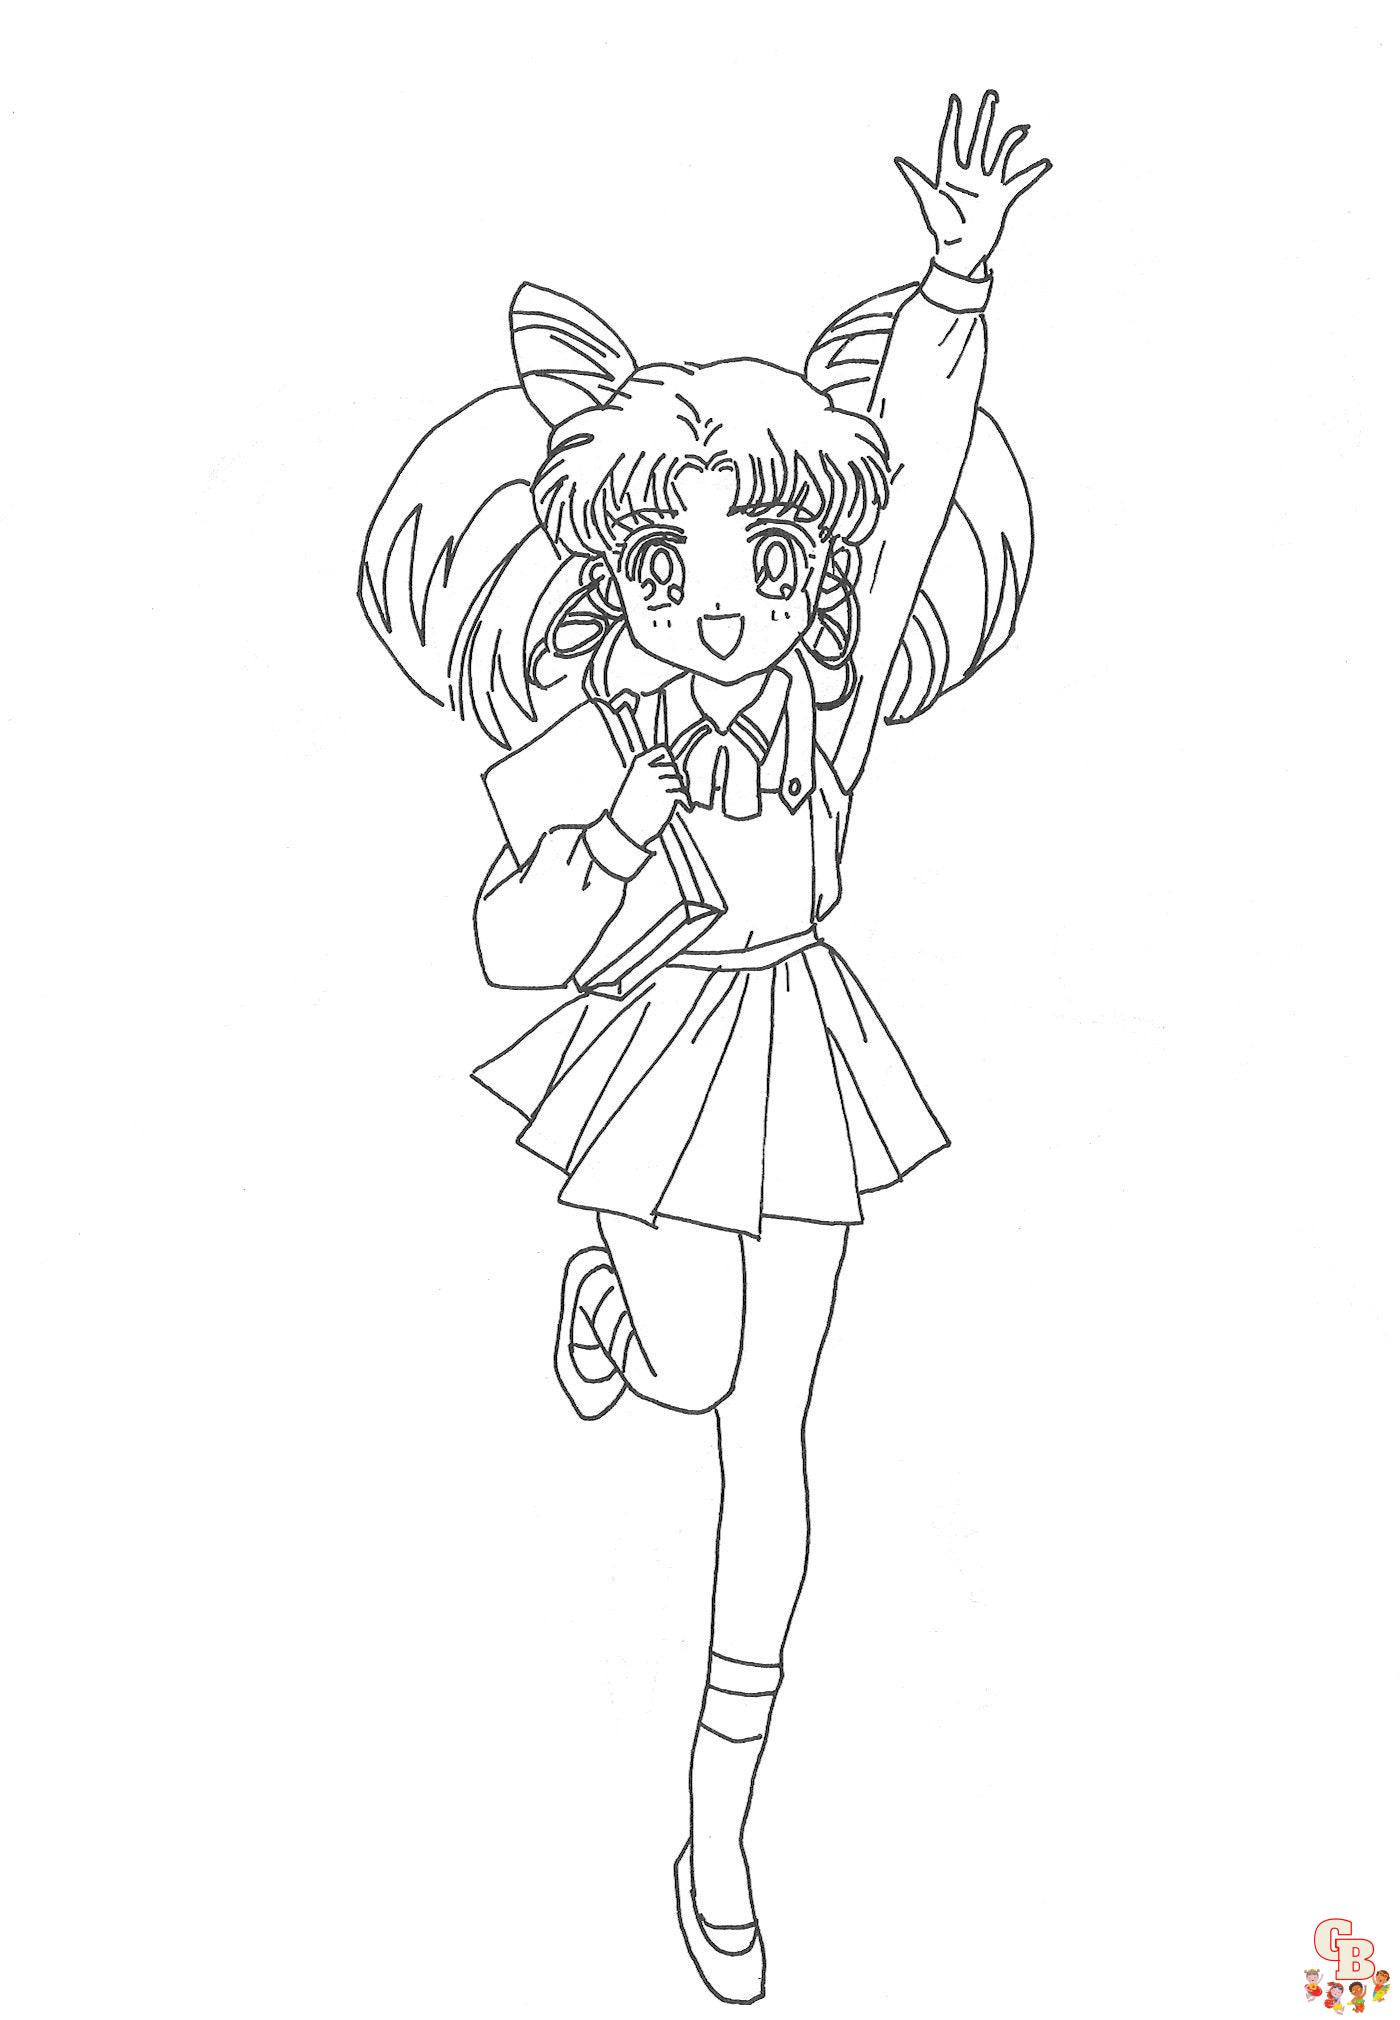 Cute Chibiusa Sailor Moon coloring pages easy